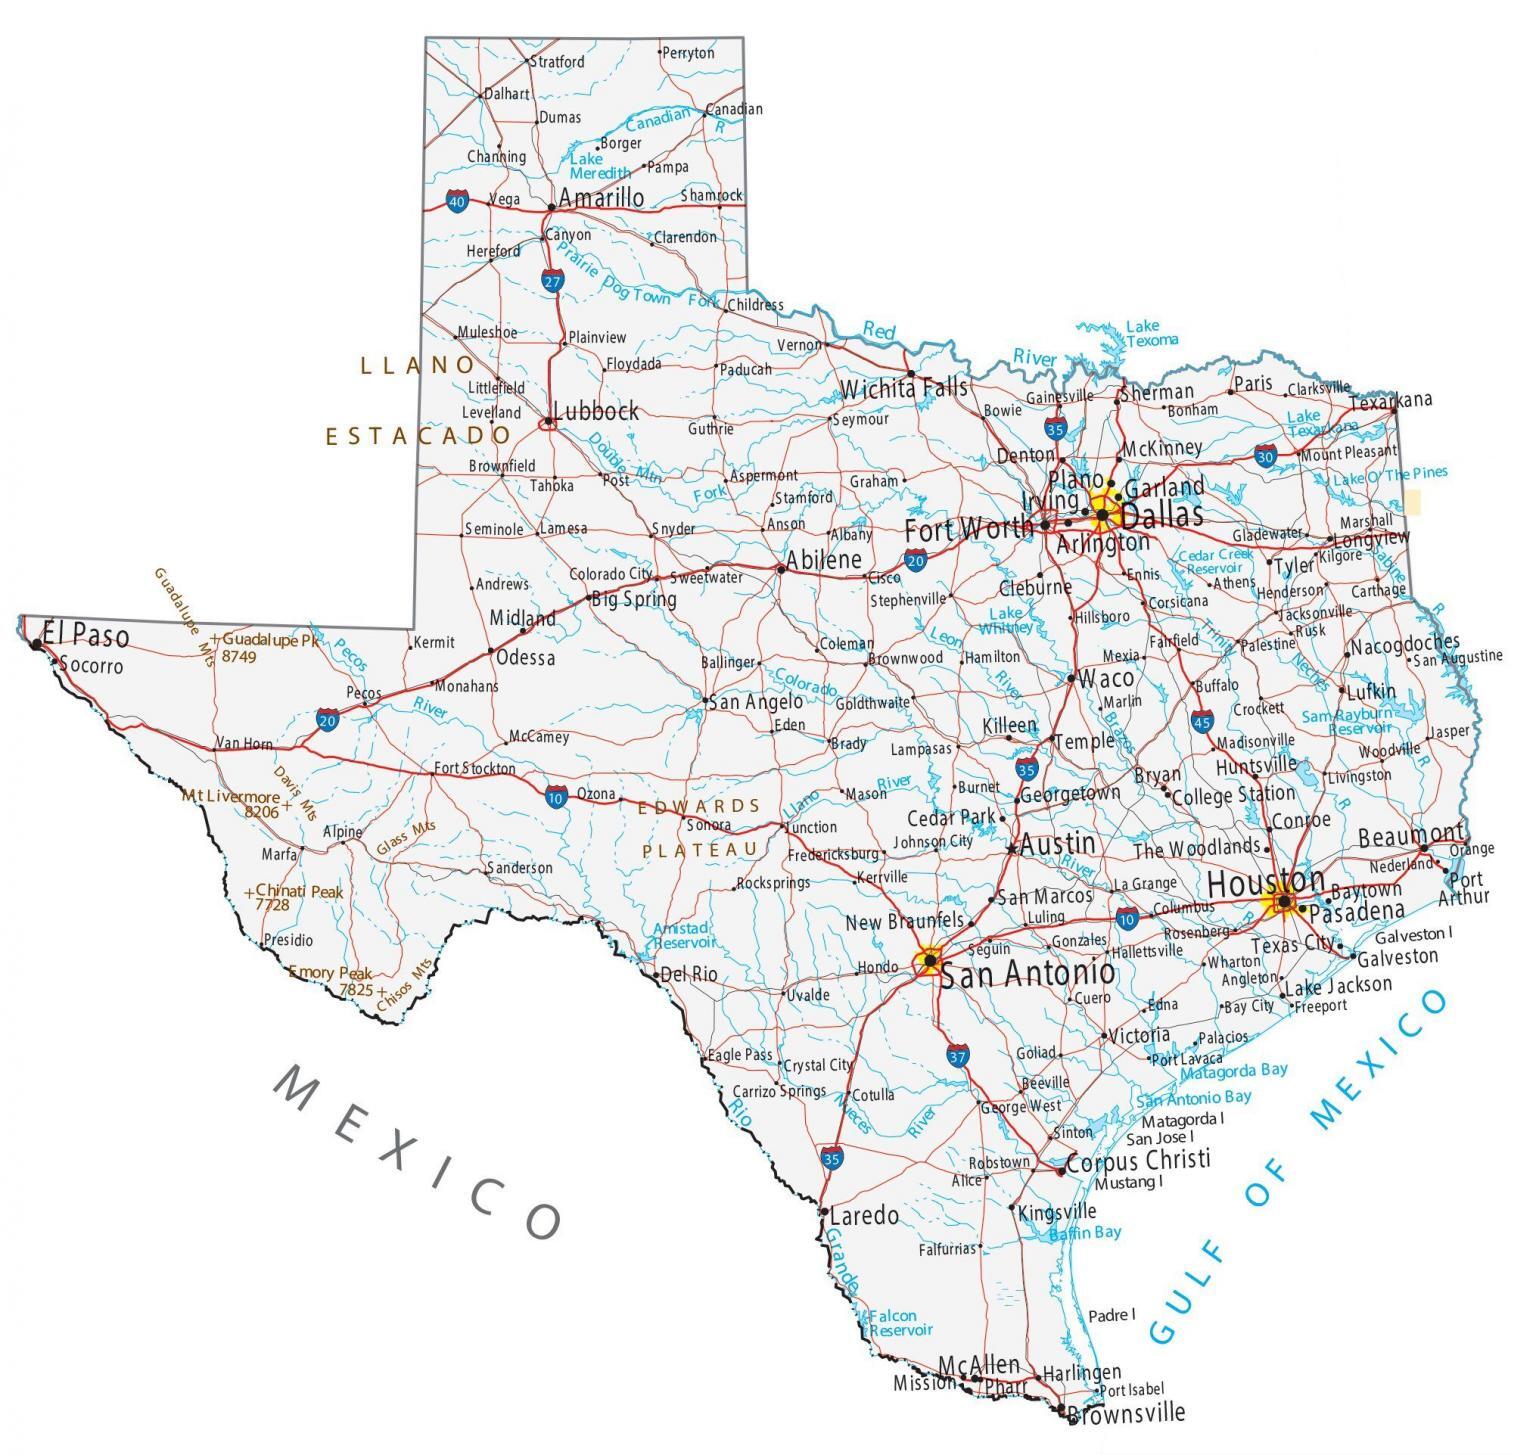 texas-lakes-and-rivers-map-gis-geography